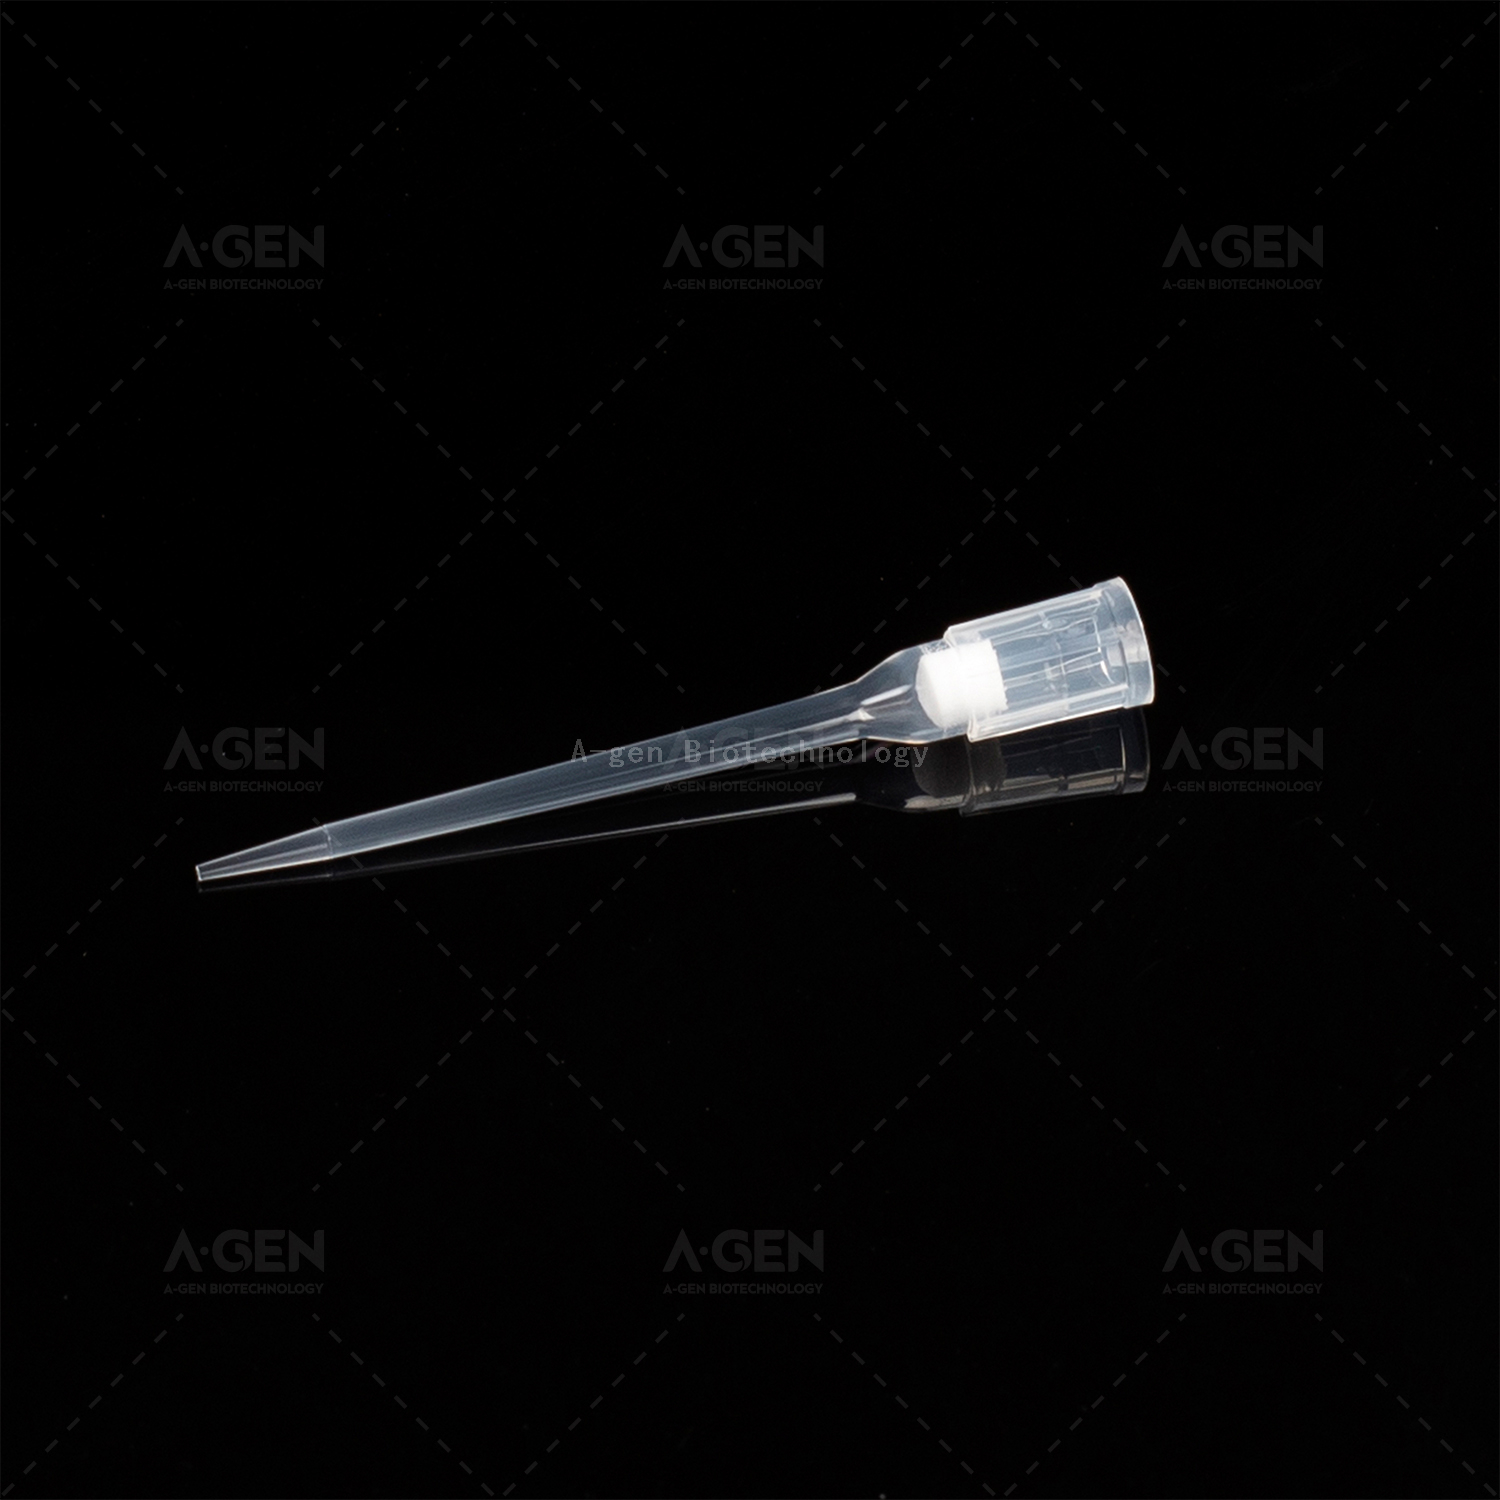 BECKMAN 50μL Clear Robotic PP Pipette Tip (Racked,sterilized) for DNA/RNA Extraction with Filter FXF-50-RSL Low Residual